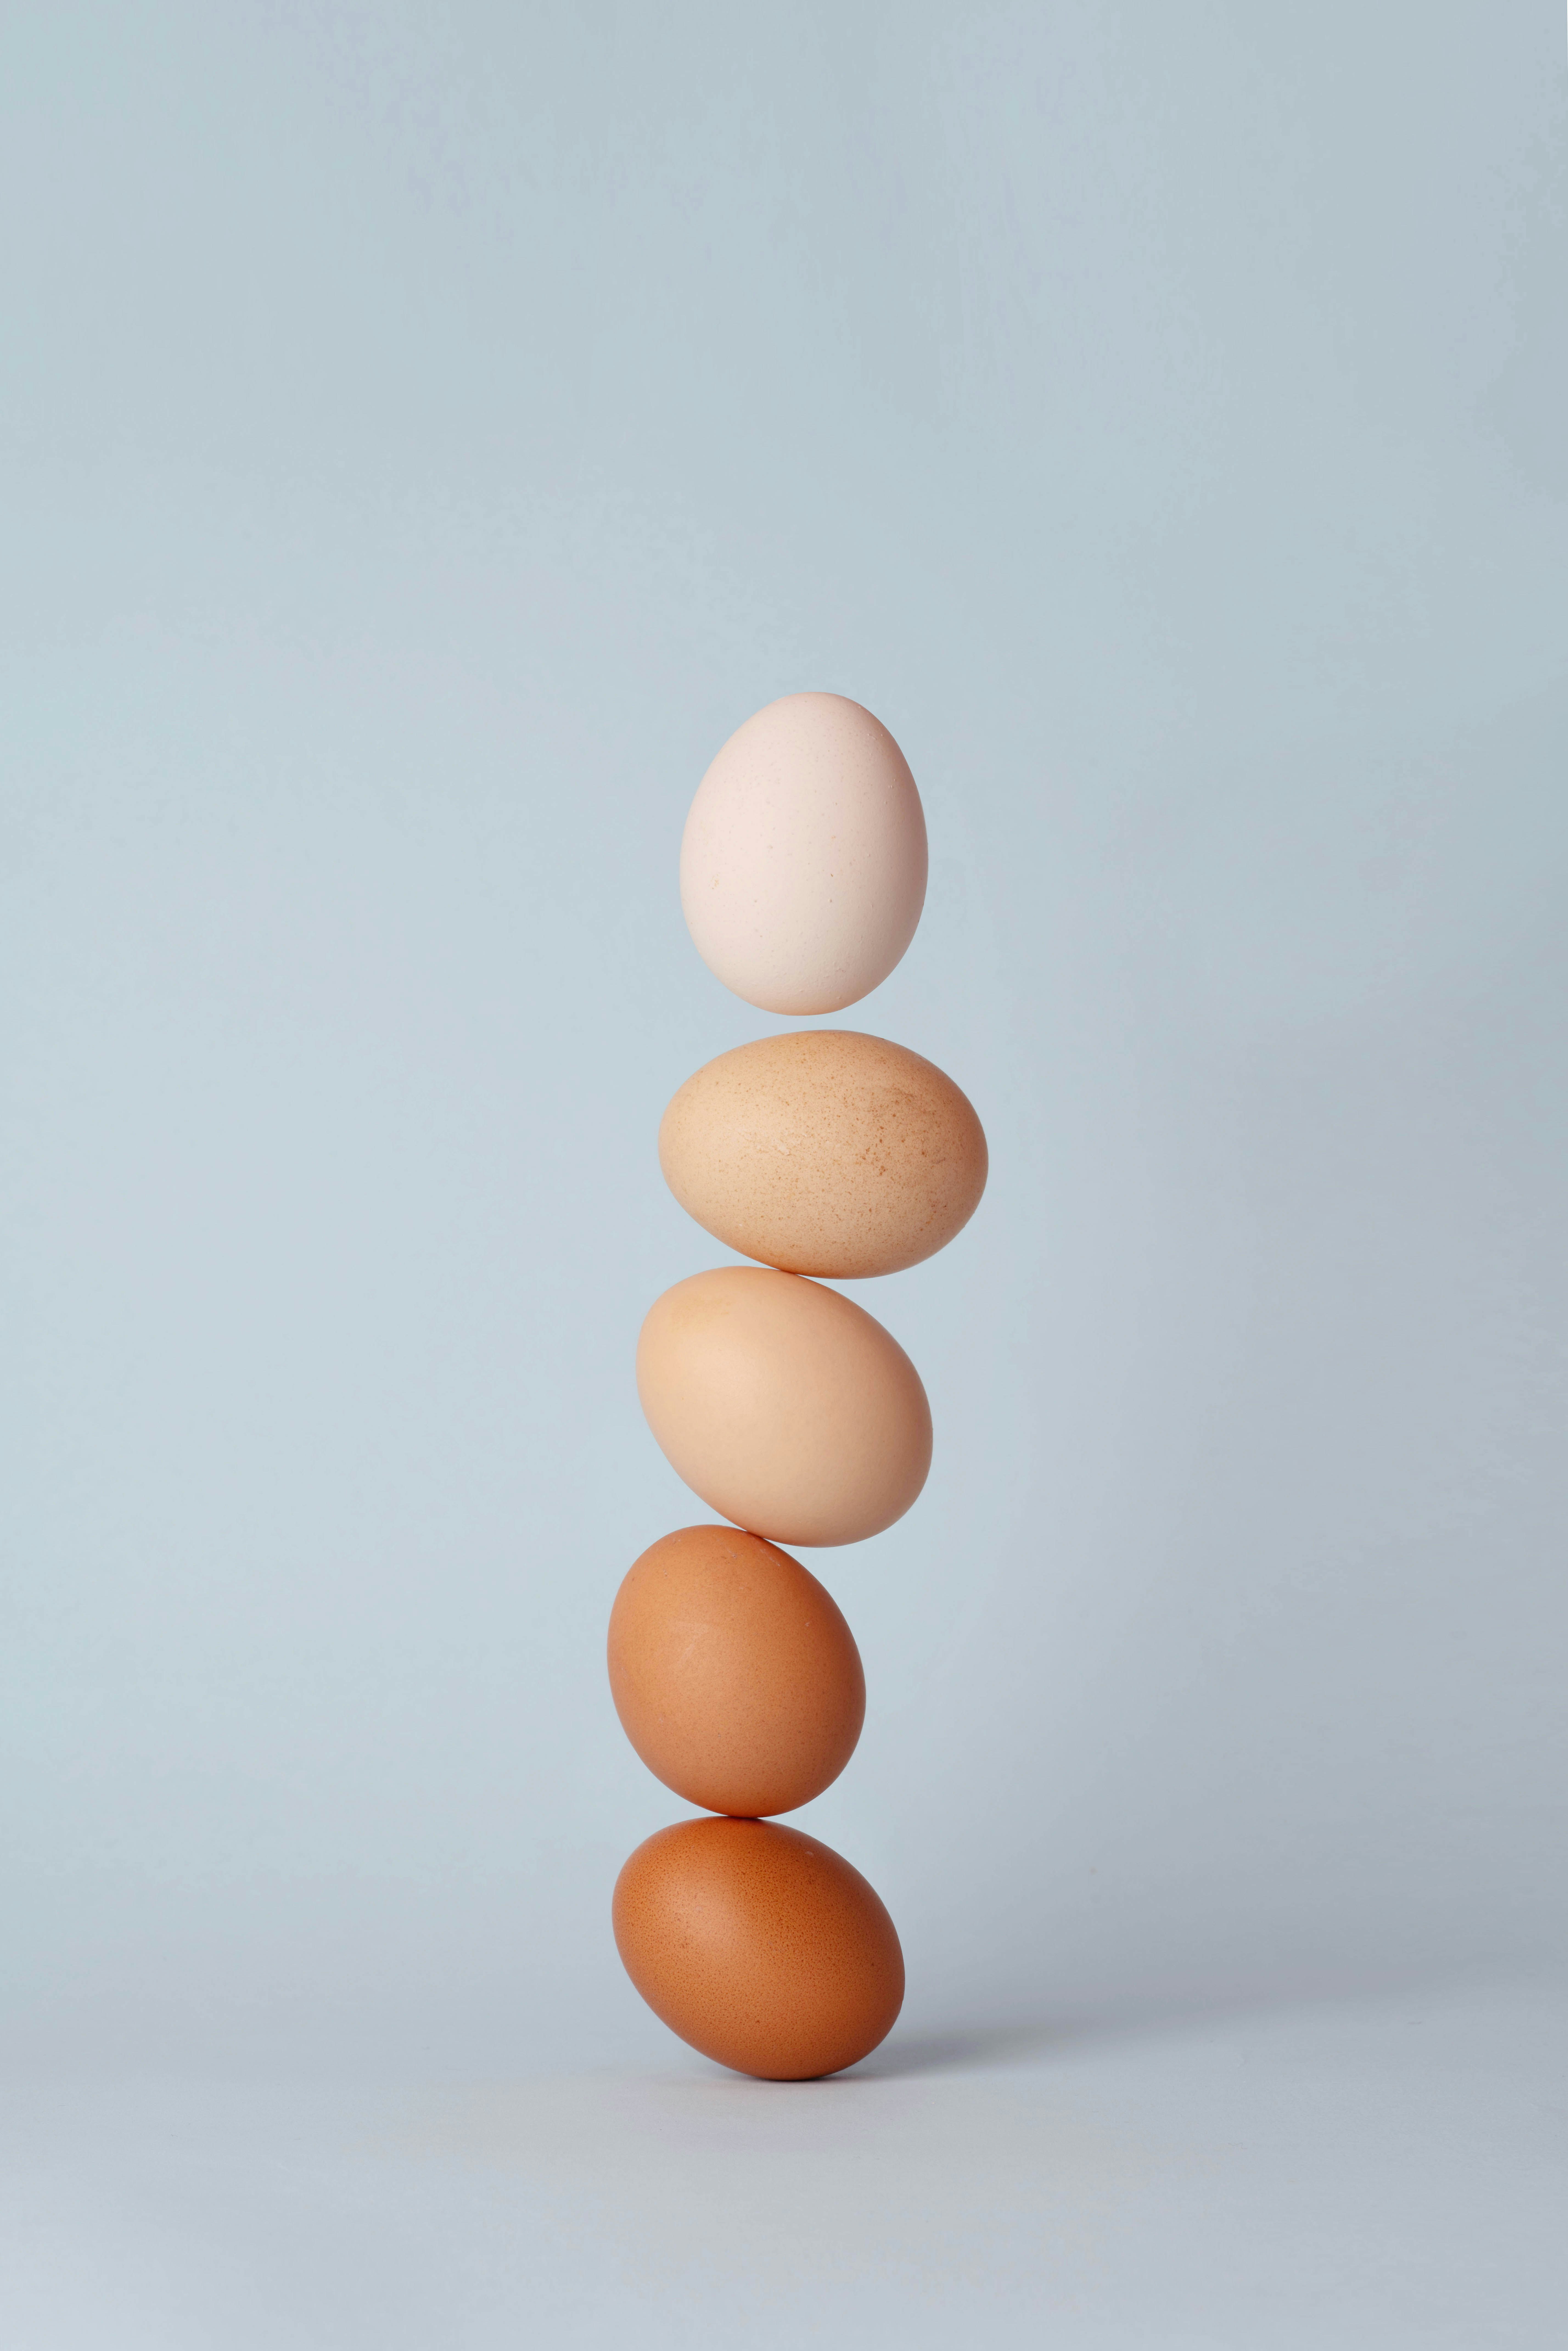 Eggs - The Latest Food to be Affected By Supply Chain Disruption